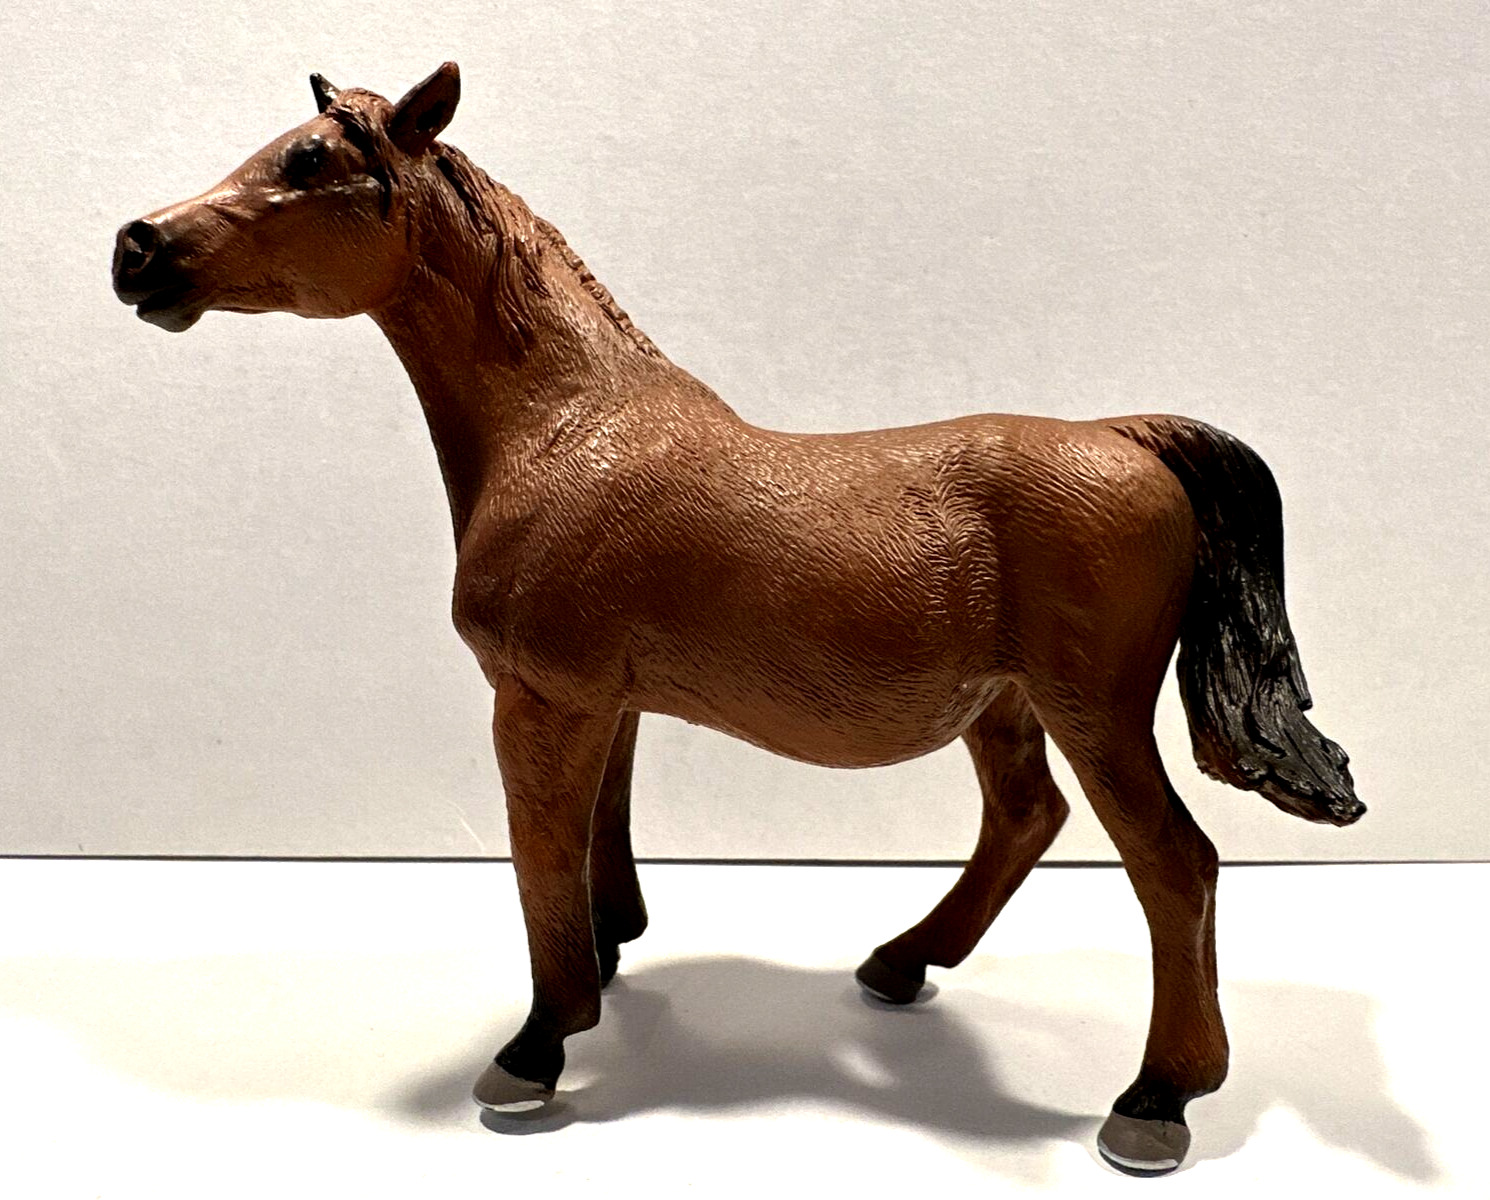 MOJO 2014 Brown Race Horse Black Tail Rare Resin Figurine 4.5” x 4” - Excellent